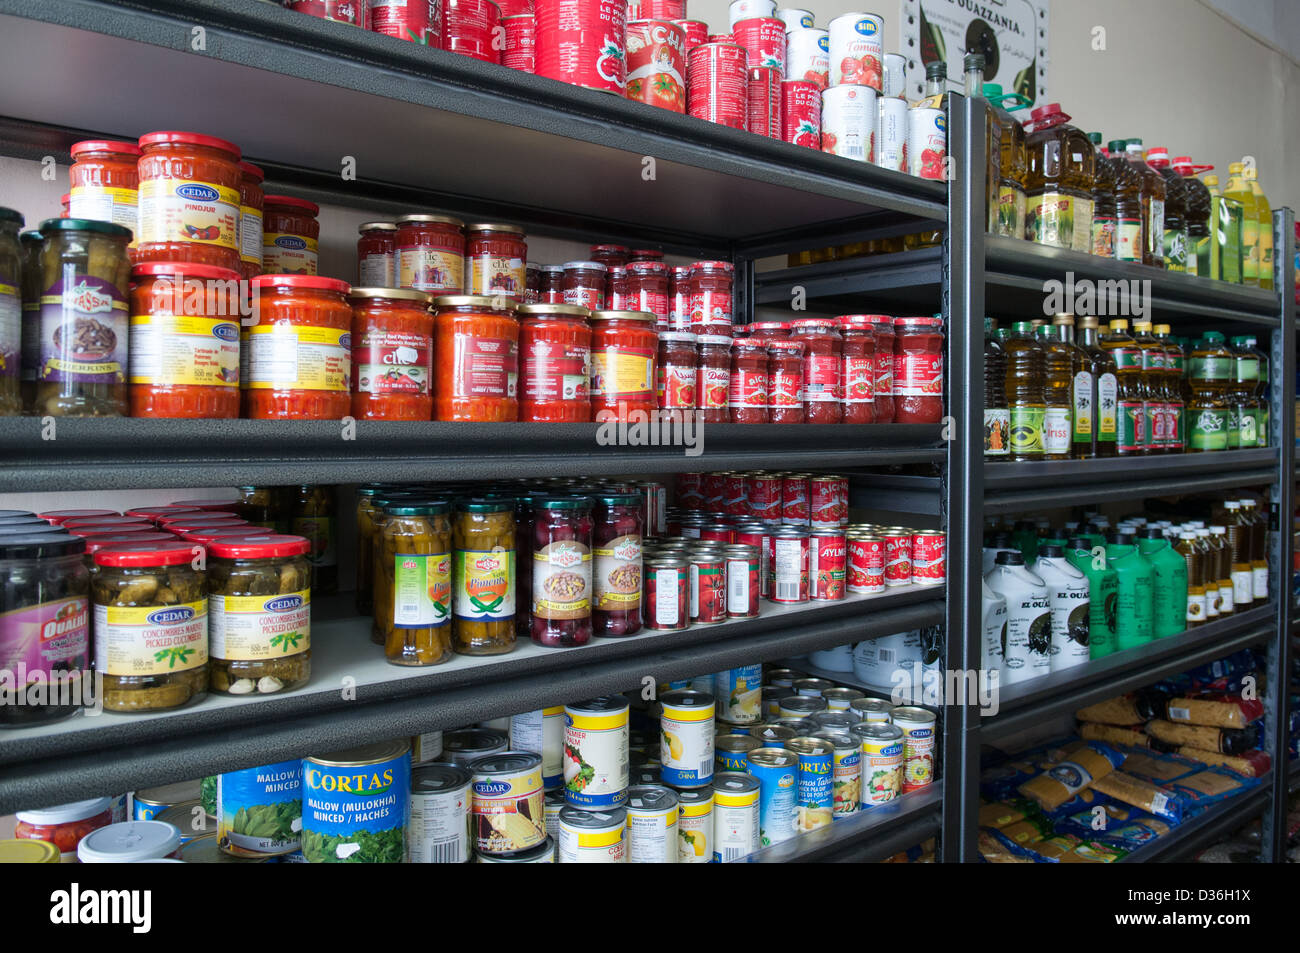 Imported food products from MIddle East and Northern Africa on Shelves of storeeconomic crises Stock Photo